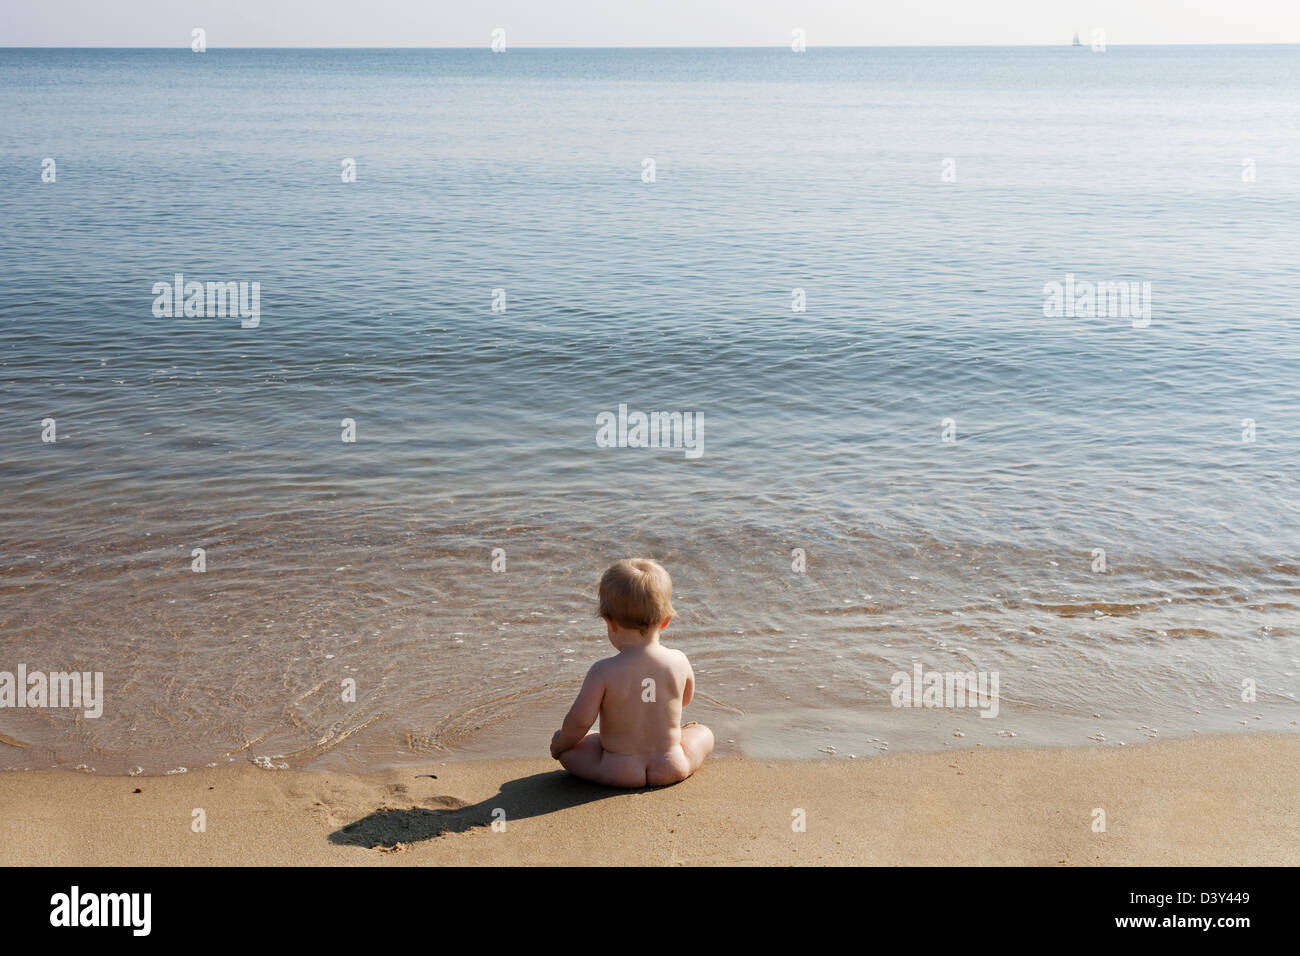 Caucasian baby sitting on beach Banque D'Images